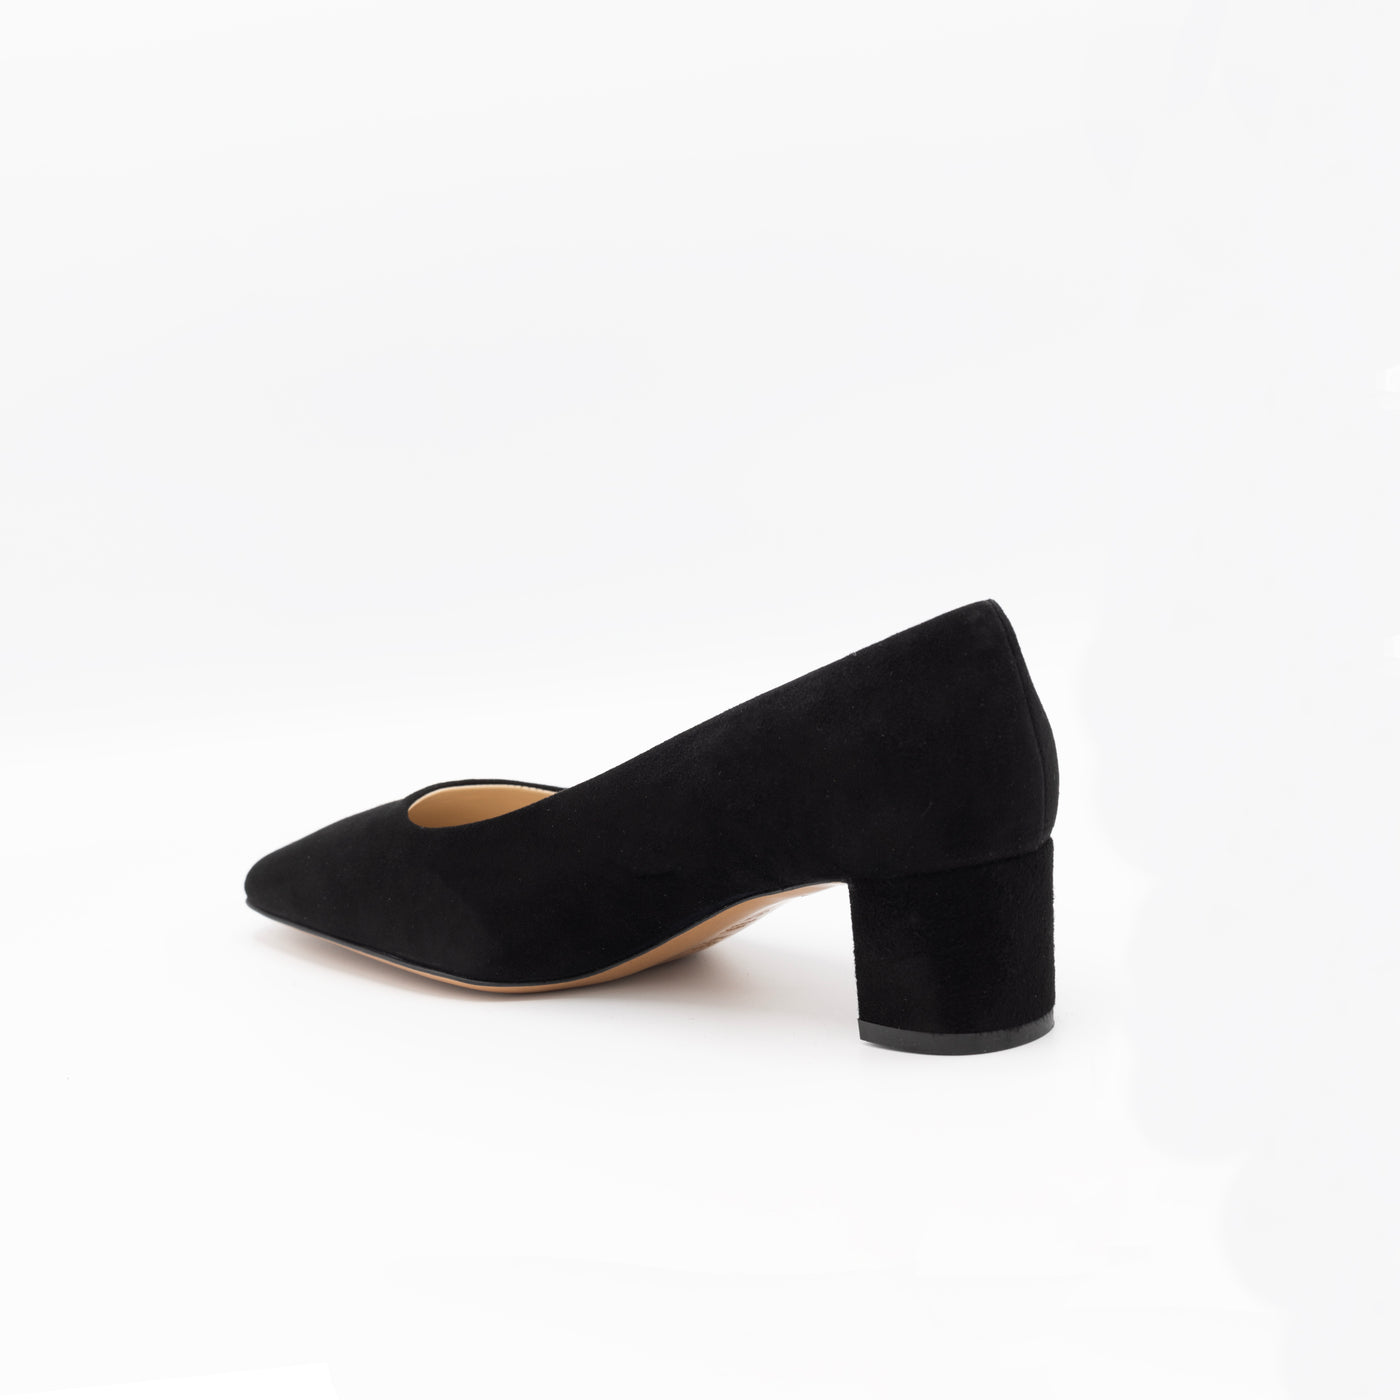 Square toe pumps in black suede and block heel.